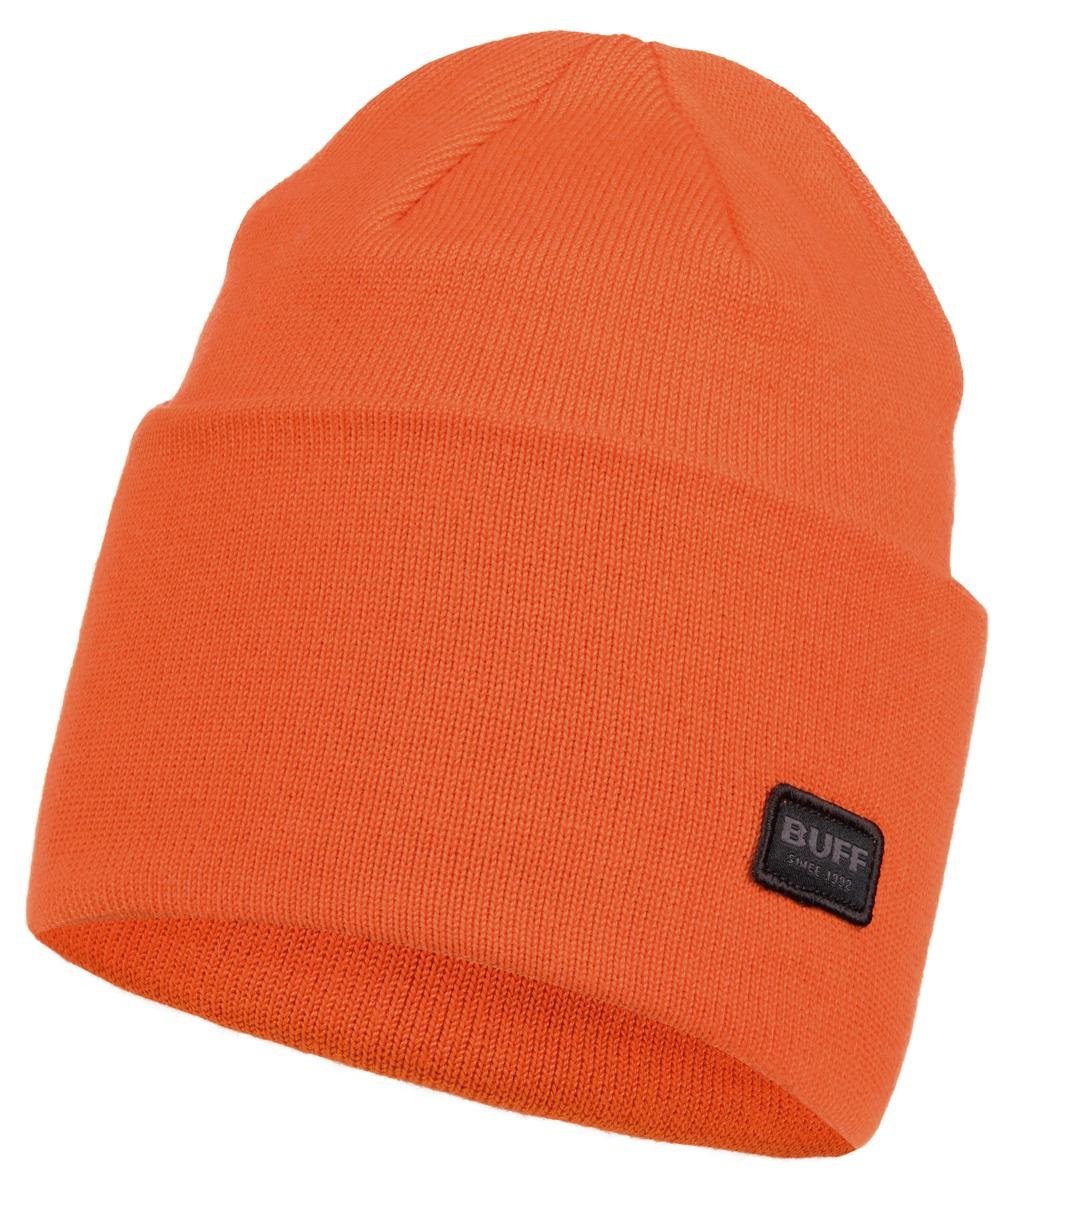 Шапка Buff Knitted Hat Niels Tangerine US:One size, 126457.202.10.00 шапка buff knitted hat niels cru us one size 126457 014 10 00